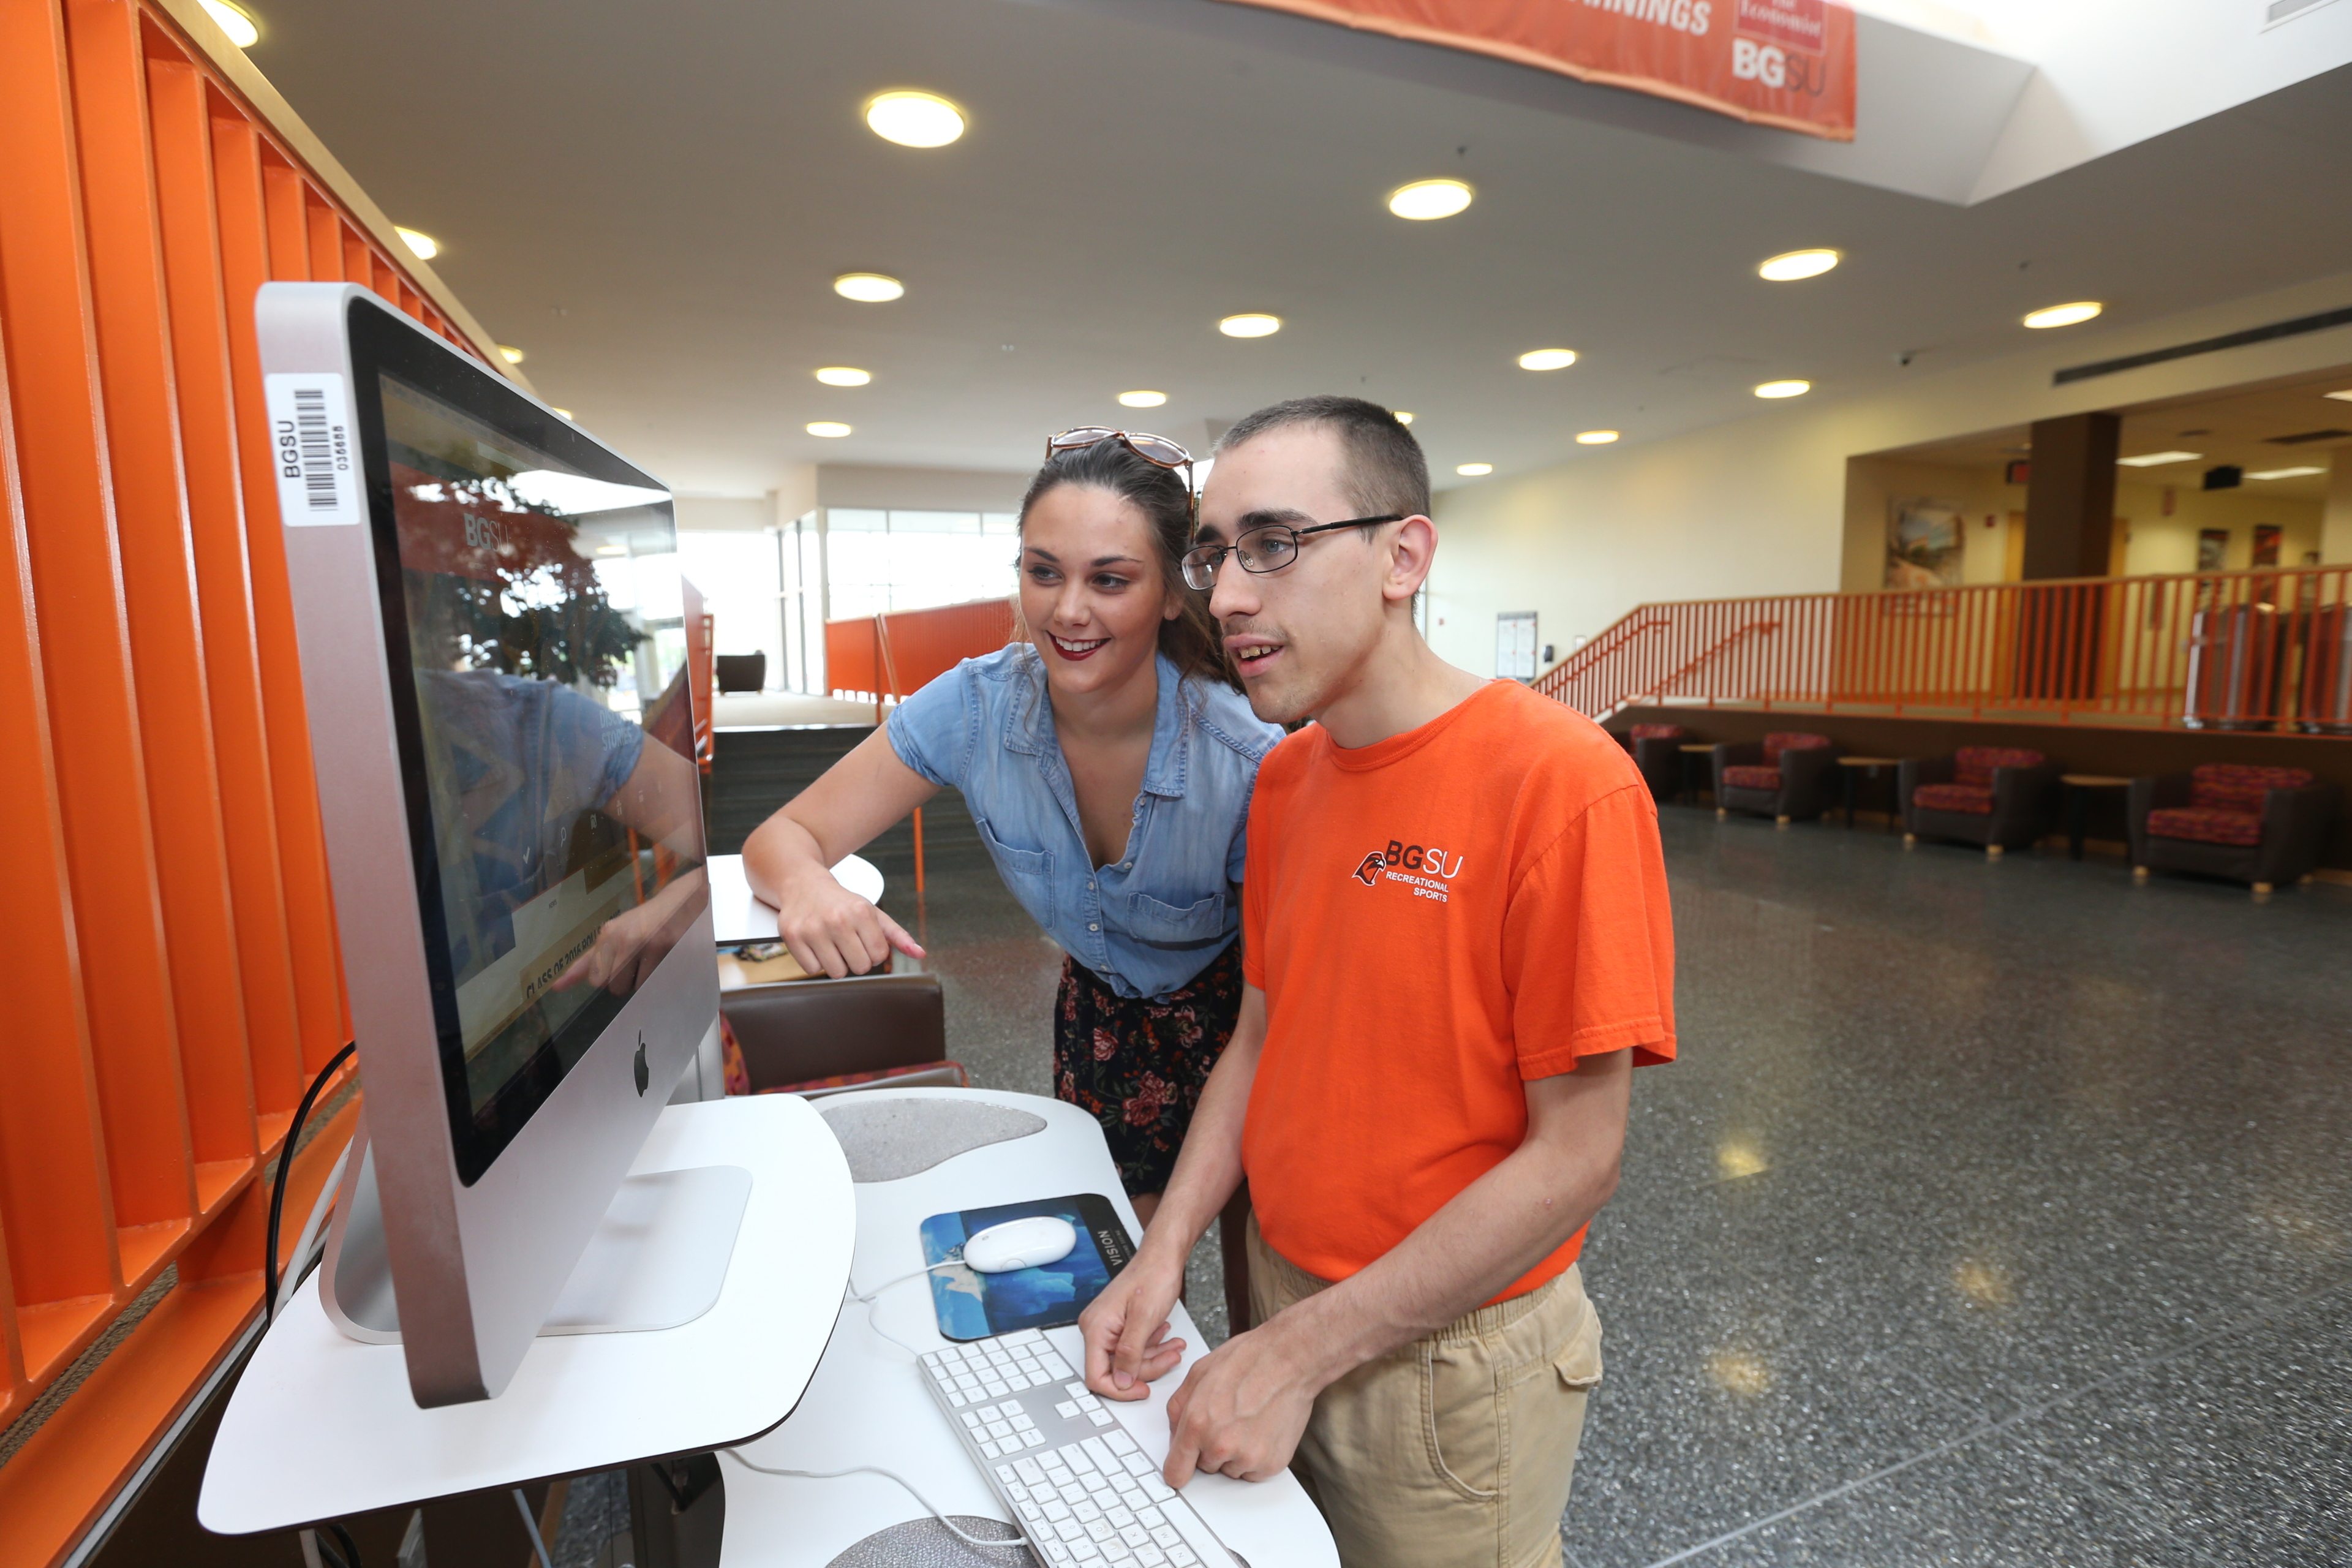 A female student in the BGSU master’s program in special education with a specialization in autism spectrum disorders works on a computer with a young man with autism.